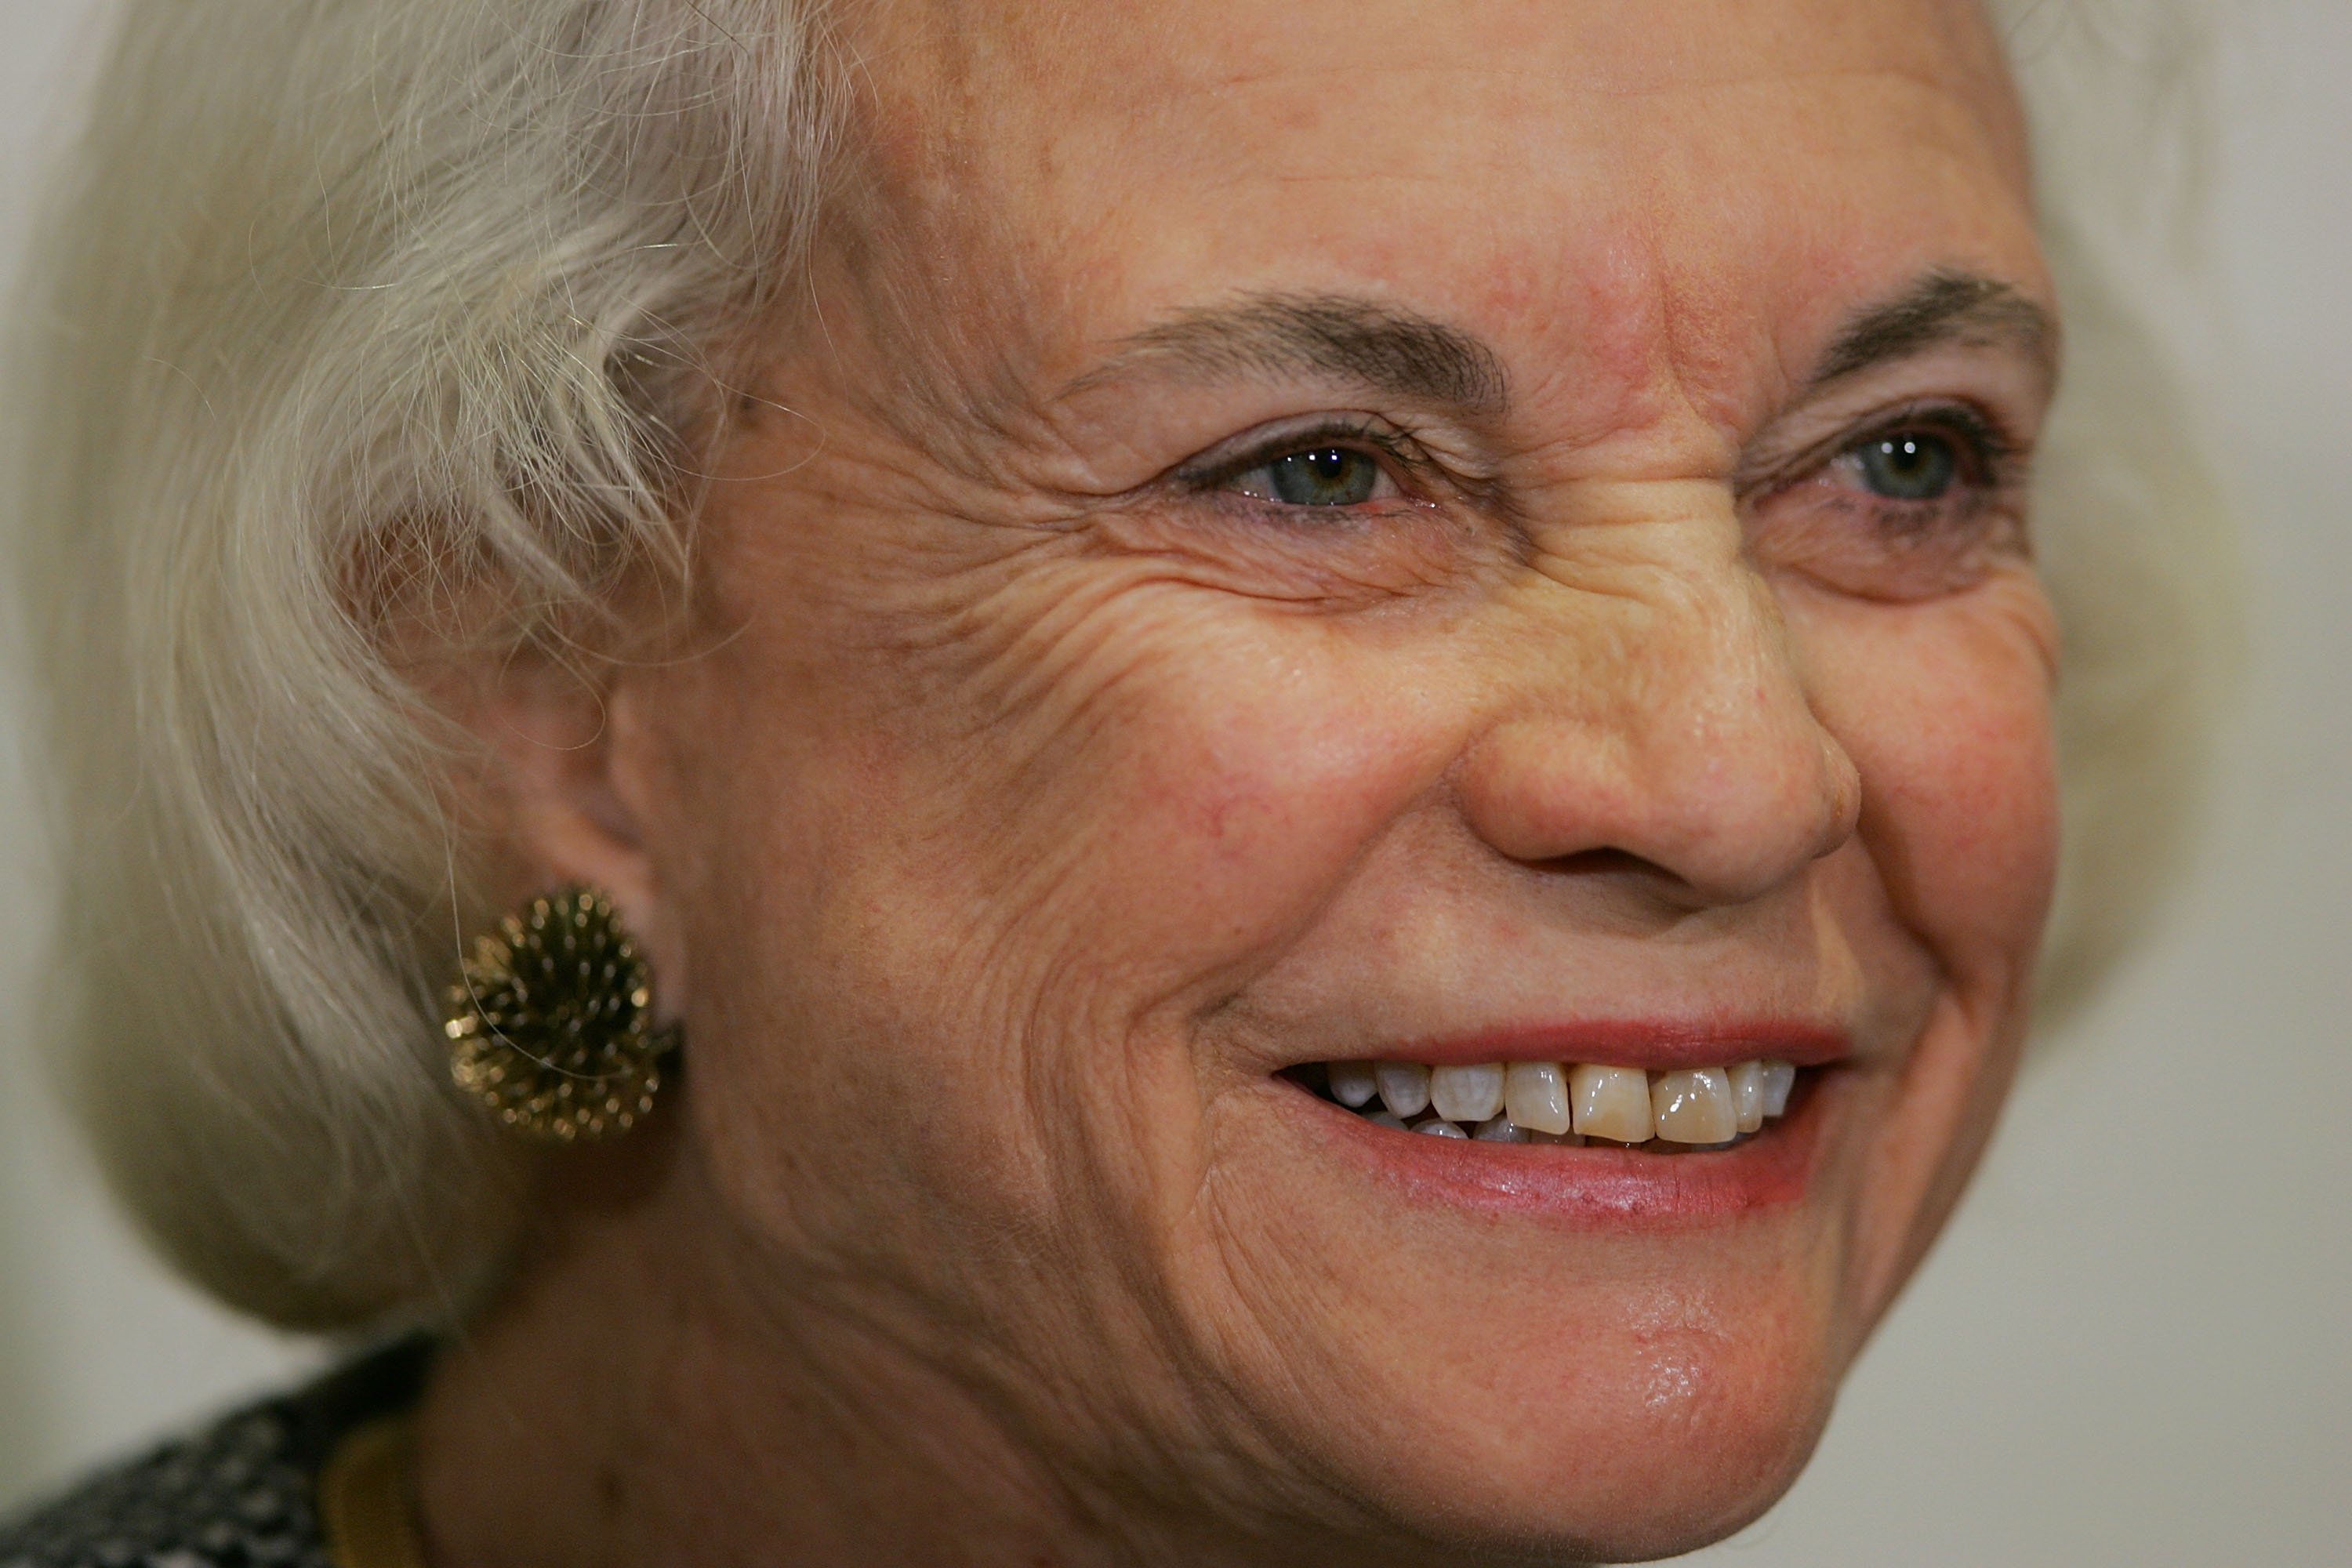  U.S. Supreme Court Justice Sandra Day O'Connor at the Moultrie Courthouse in Washington, DC | Photo: Getty Images